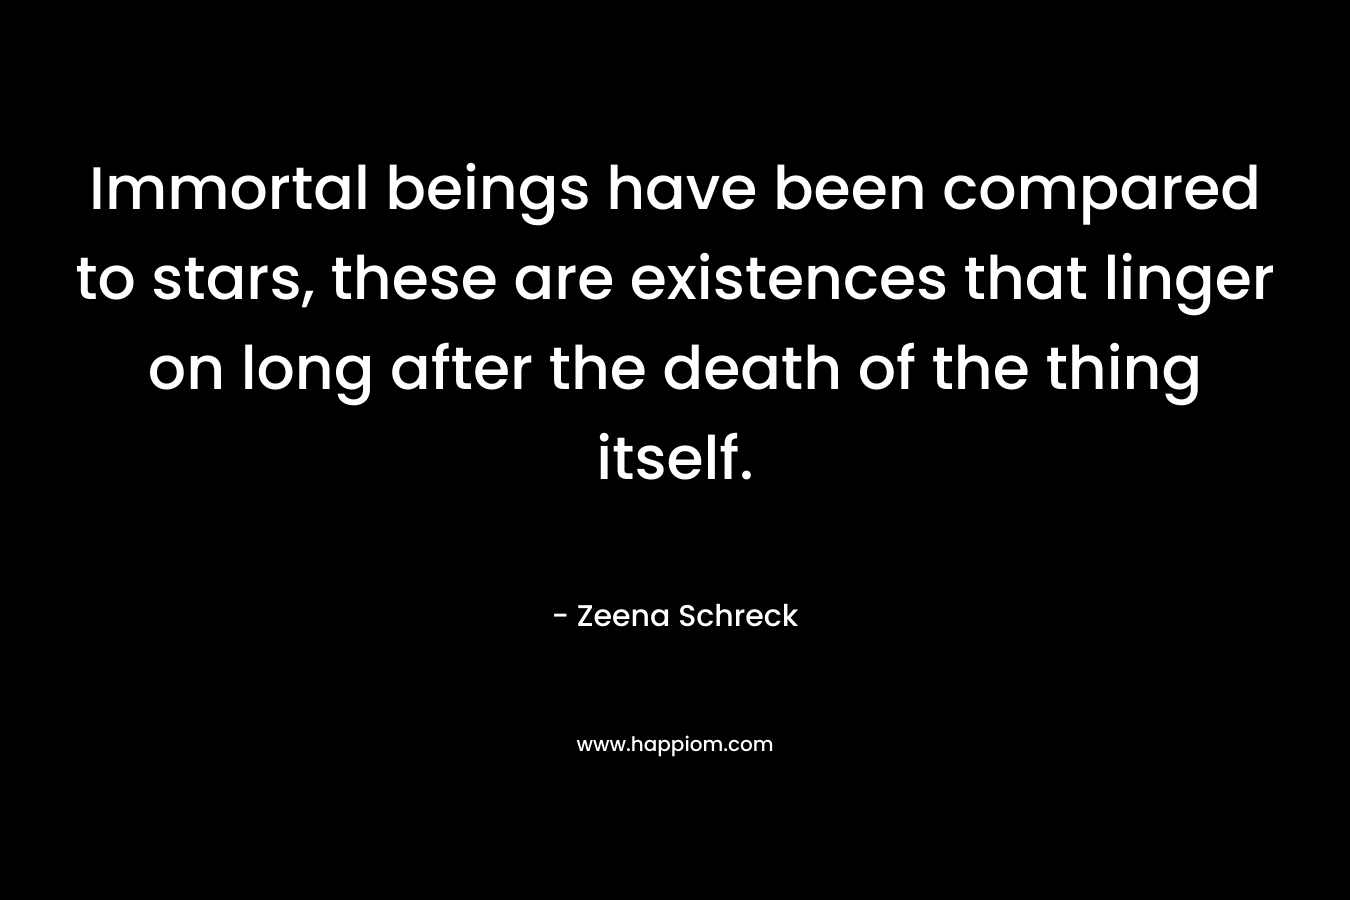 Immortal beings have been compared to stars, these are existences that linger on long after the death of the thing itself. – Zeena Schreck